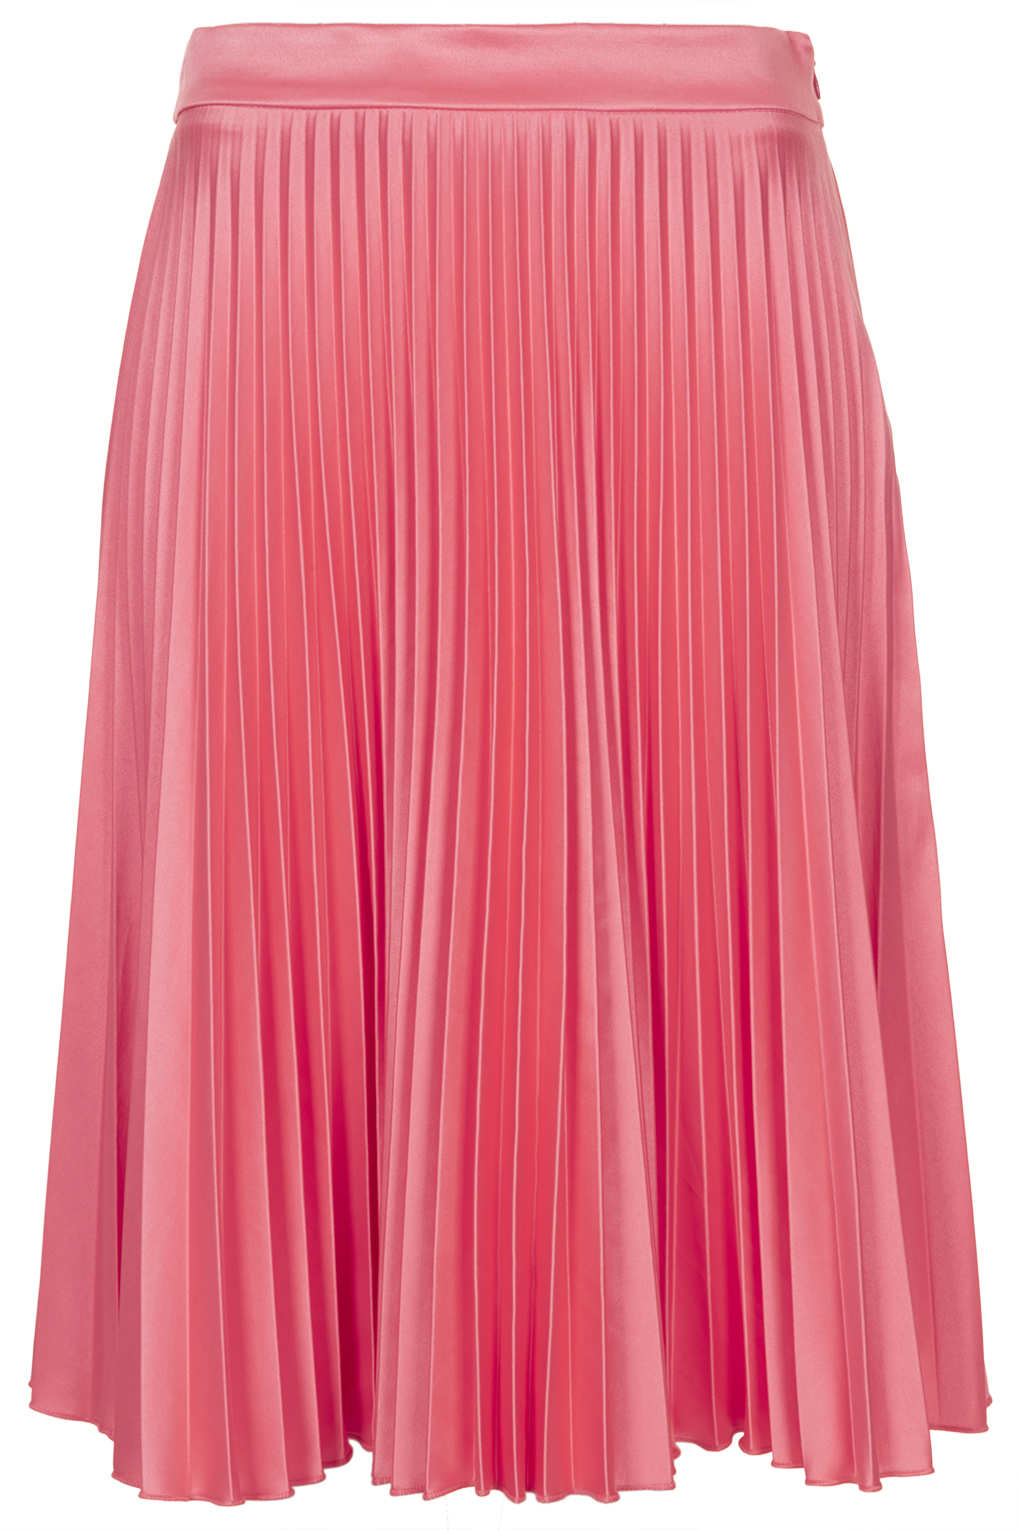 Lyst Topshop Pink Sunray Pleat Skirt In Pink 0641